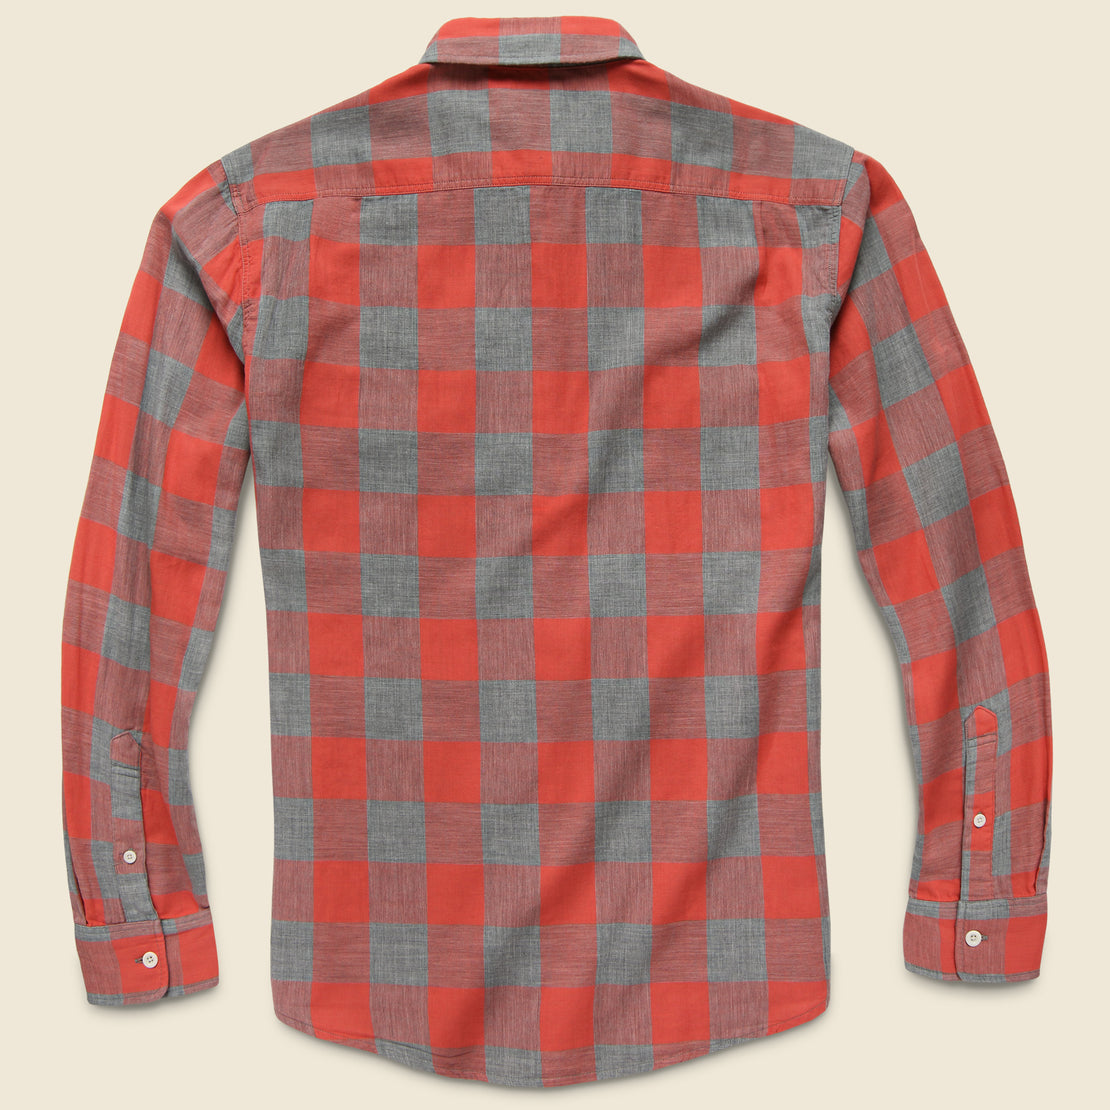 Belmar Workshirt - Red Buffalo Check - Faherty - STAG Provisions - Tops - L/S Woven - Plaid